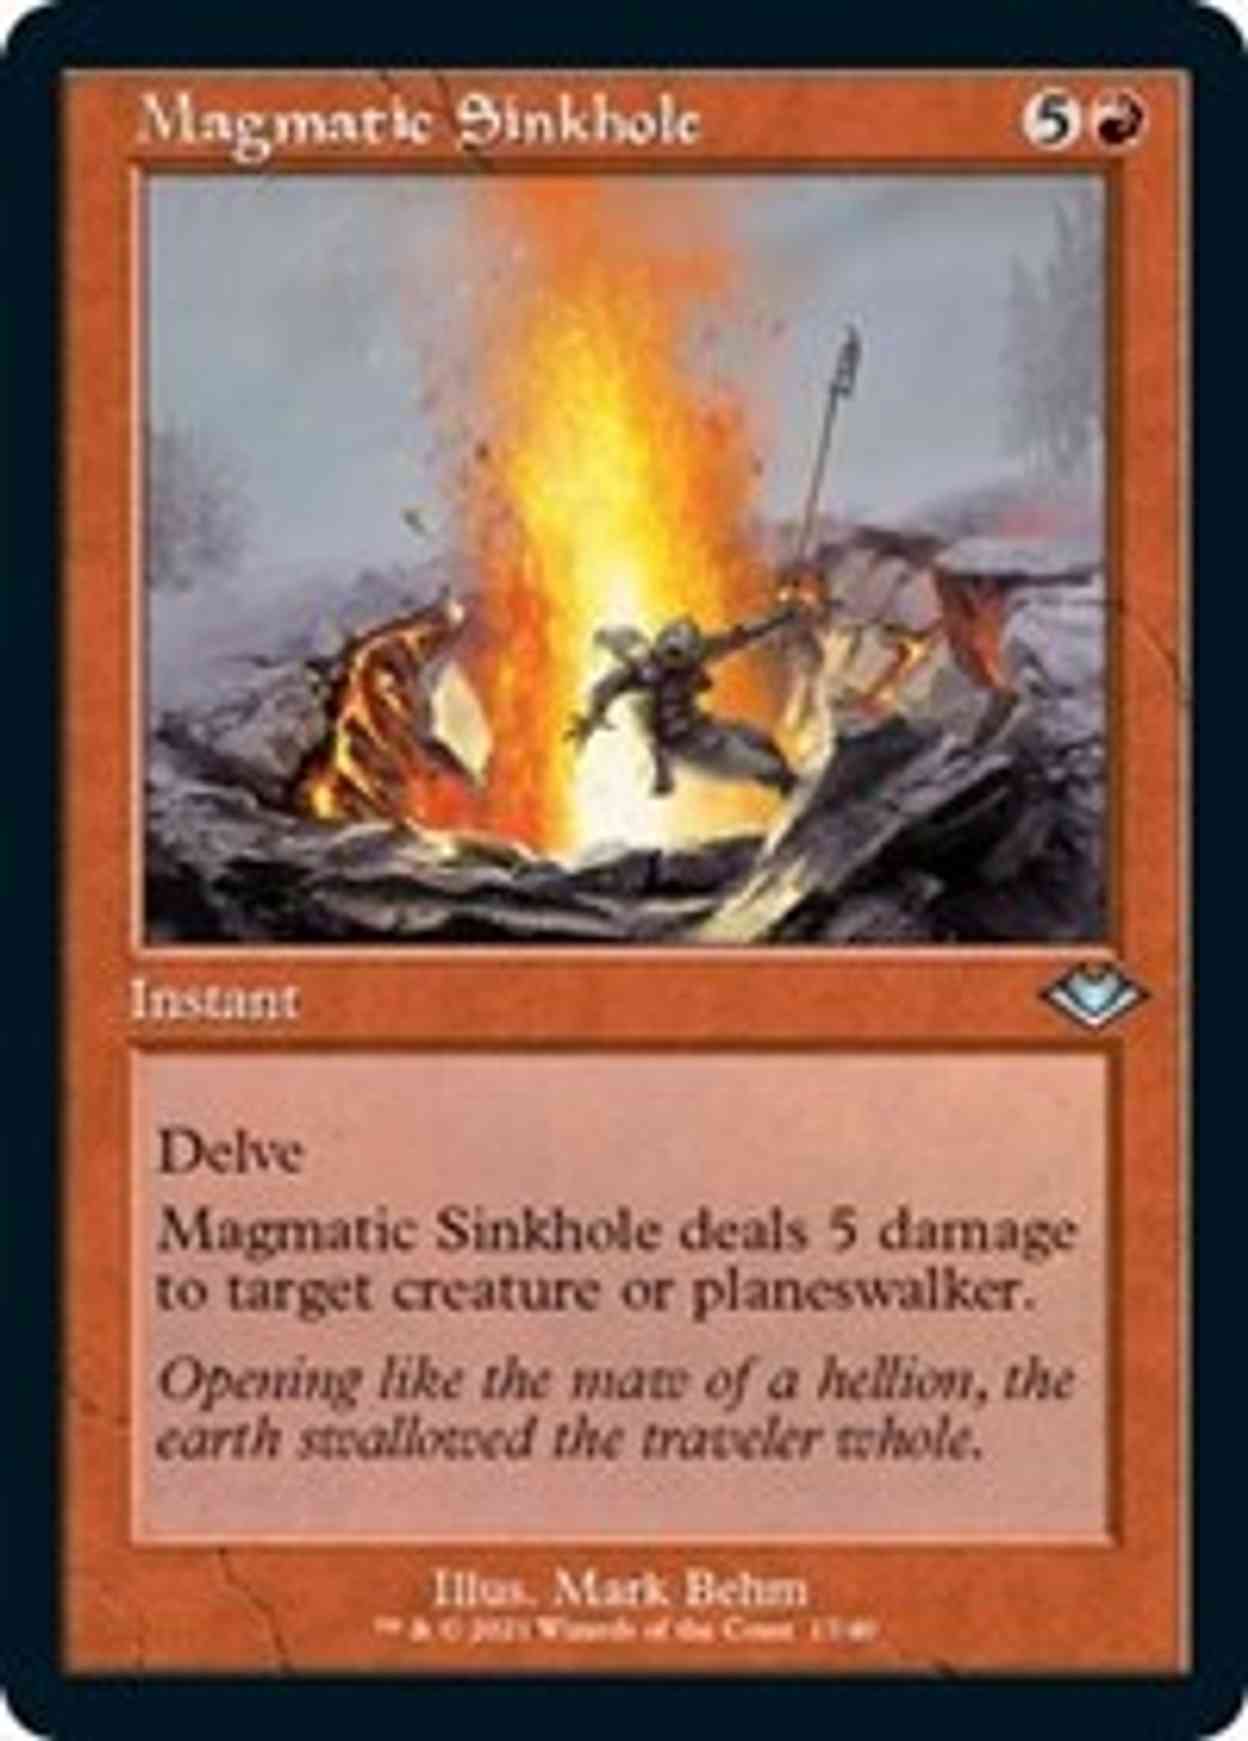 Magmatic Sinkhole (Retro Frame) (Foil Etched) magic card front